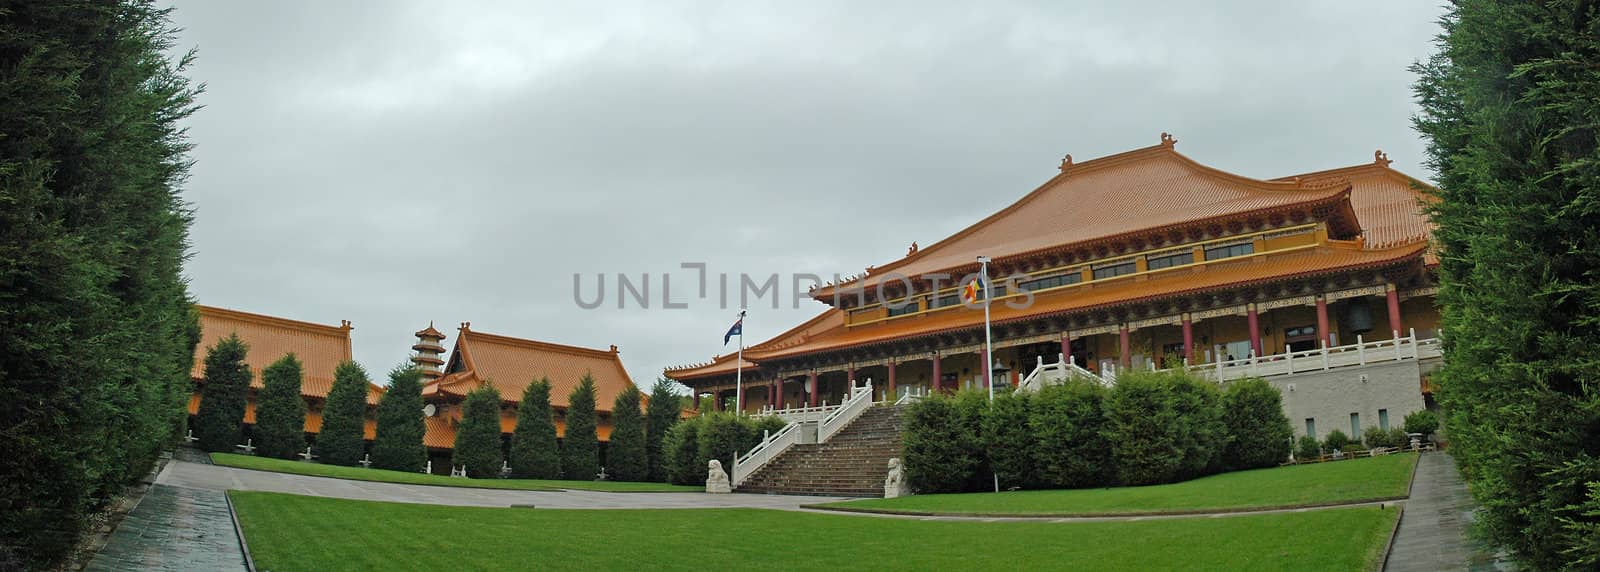 Nan Tien Temple (Southern Heaven Temple) is on the southern outskirts of the Australian city of Wollongong, approximately 80 km south of Sydney